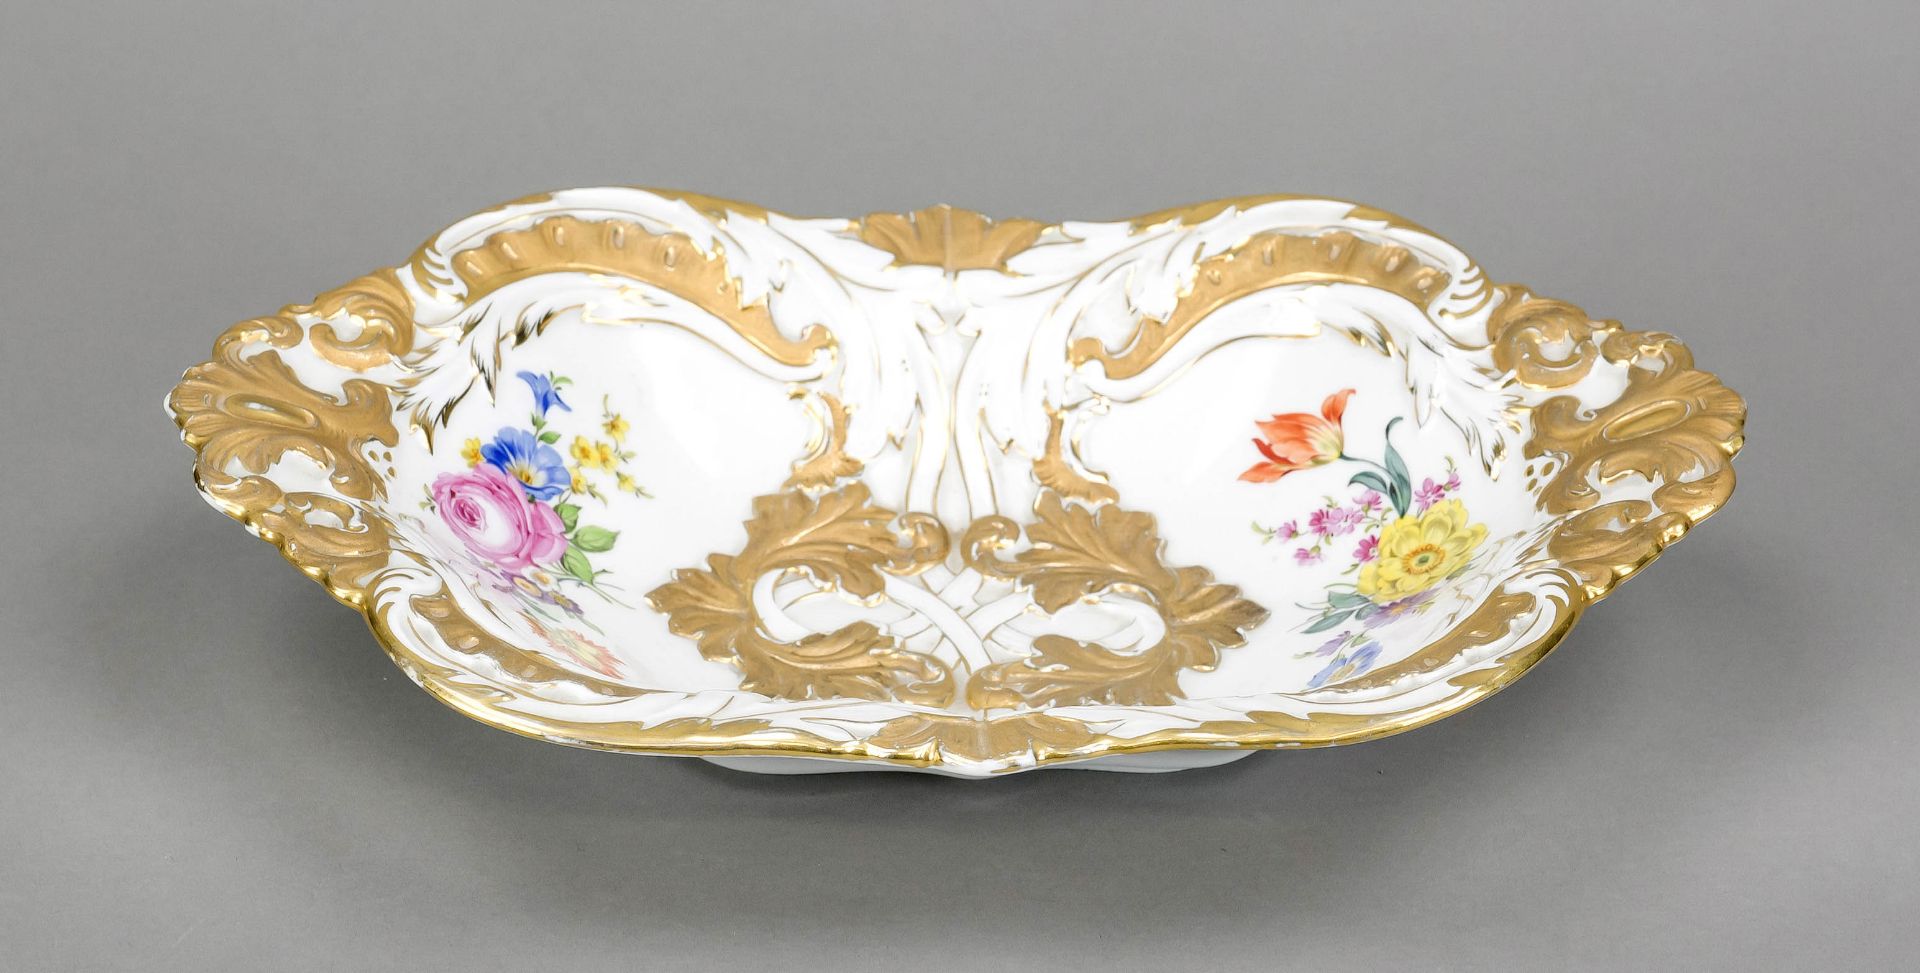 Oval ceremonial bowl, Meissen, post-1950, 2nd choice, model no. B185, quadripartite curved oval form